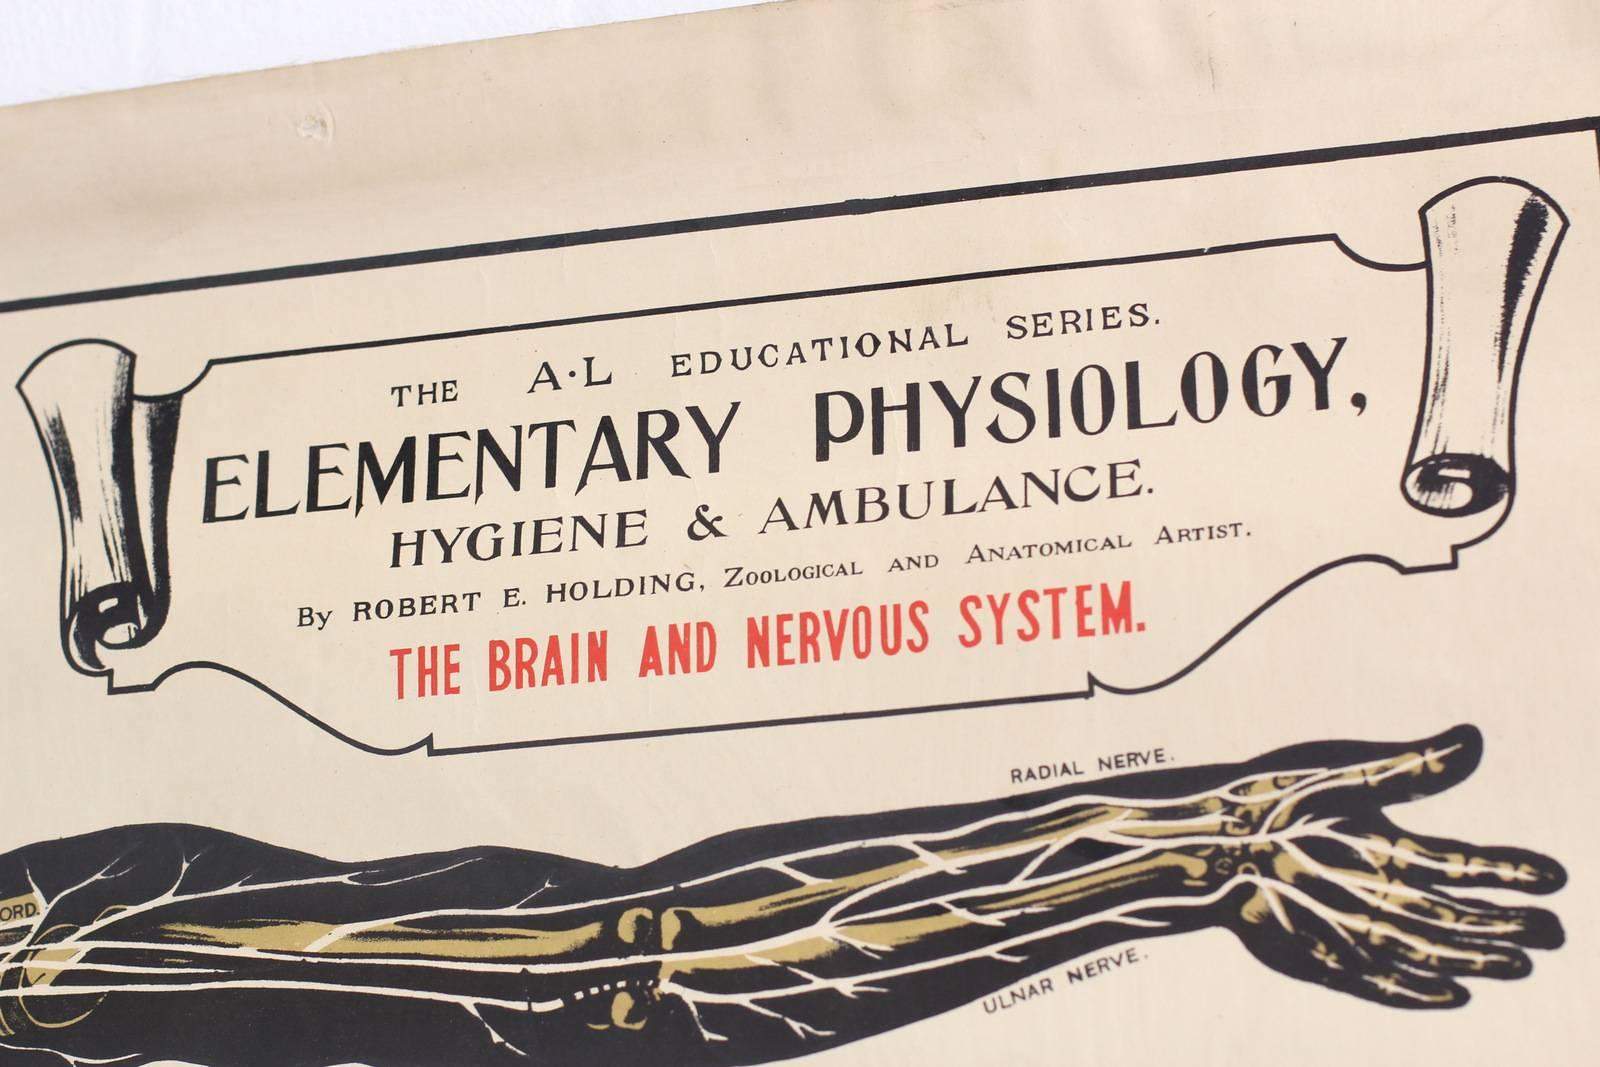 Edwardian Anatomical Chart of the Nervous System by Robert E Holding circa 1910